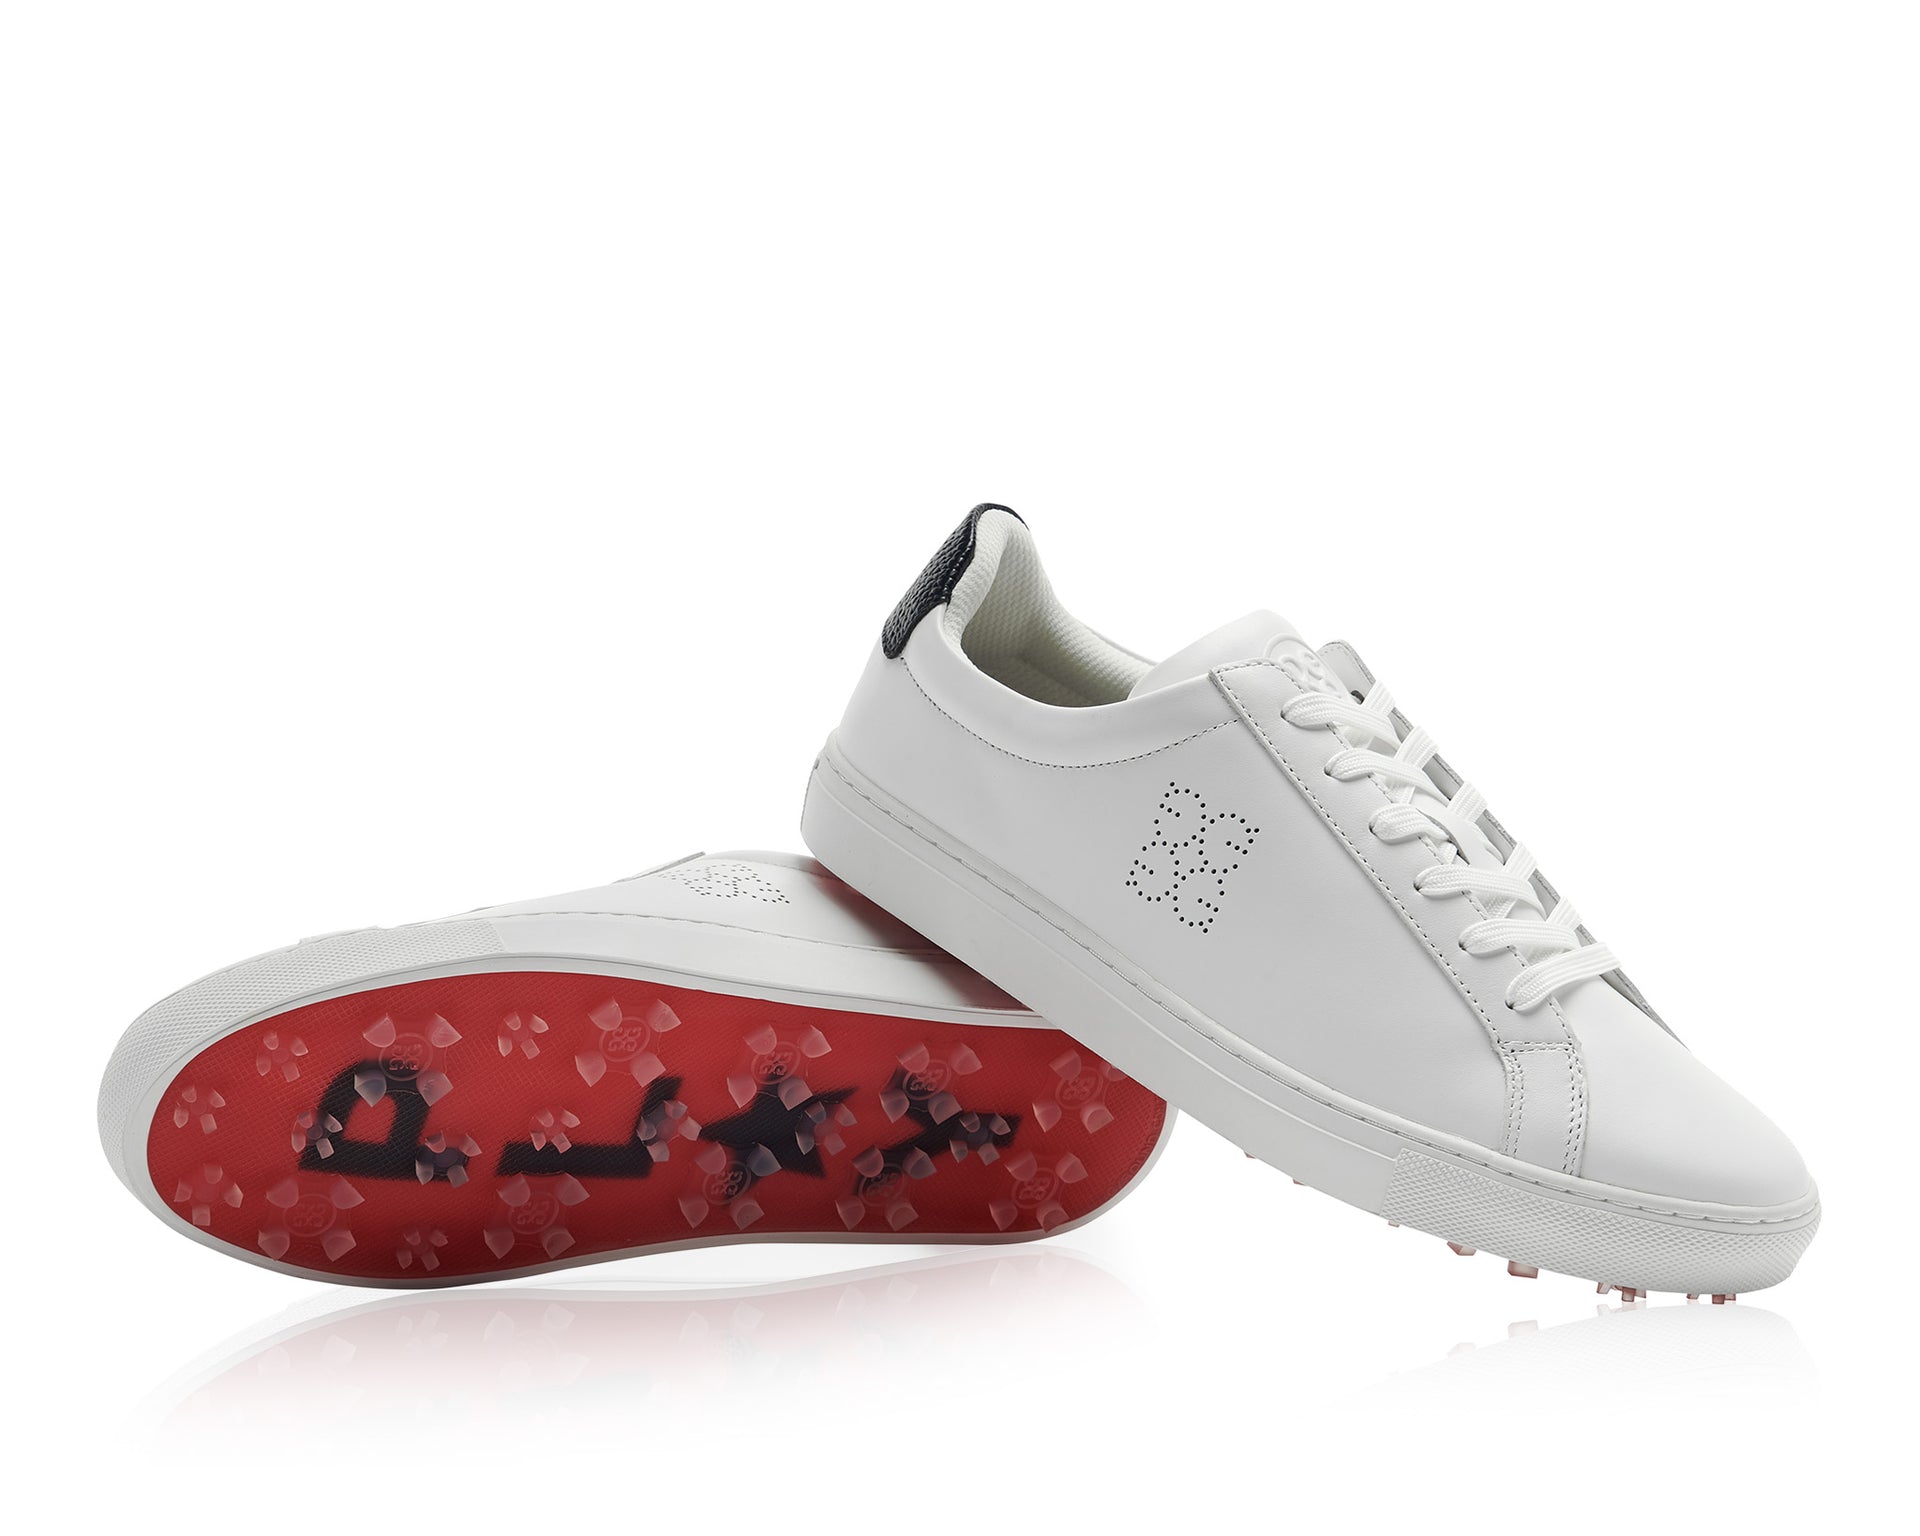 g fore golf shoes uk